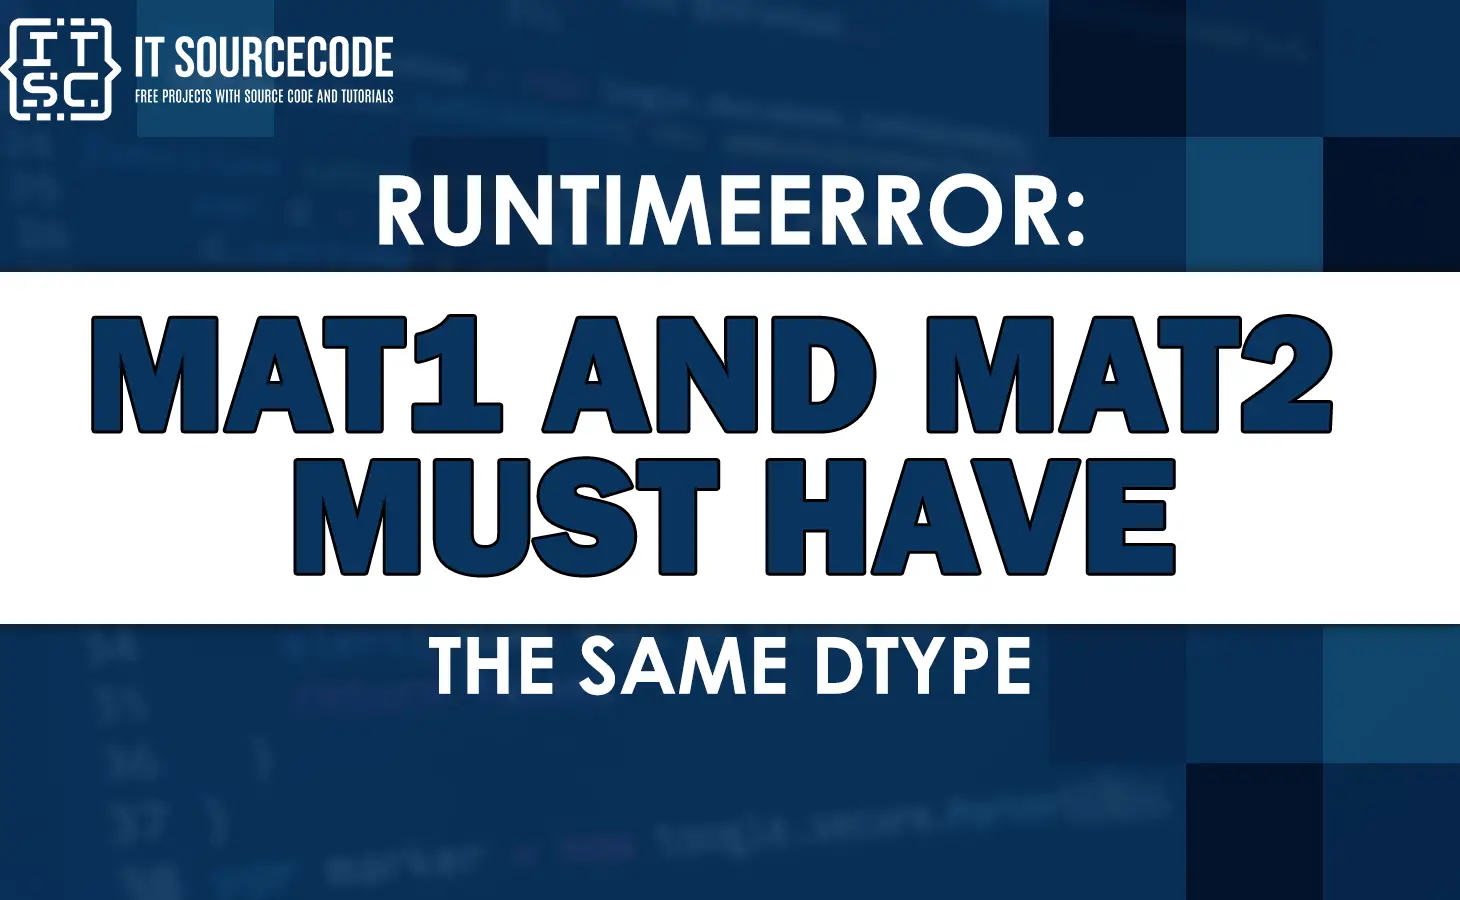 runtimeerror mat1 and mat2 must have the same dtype